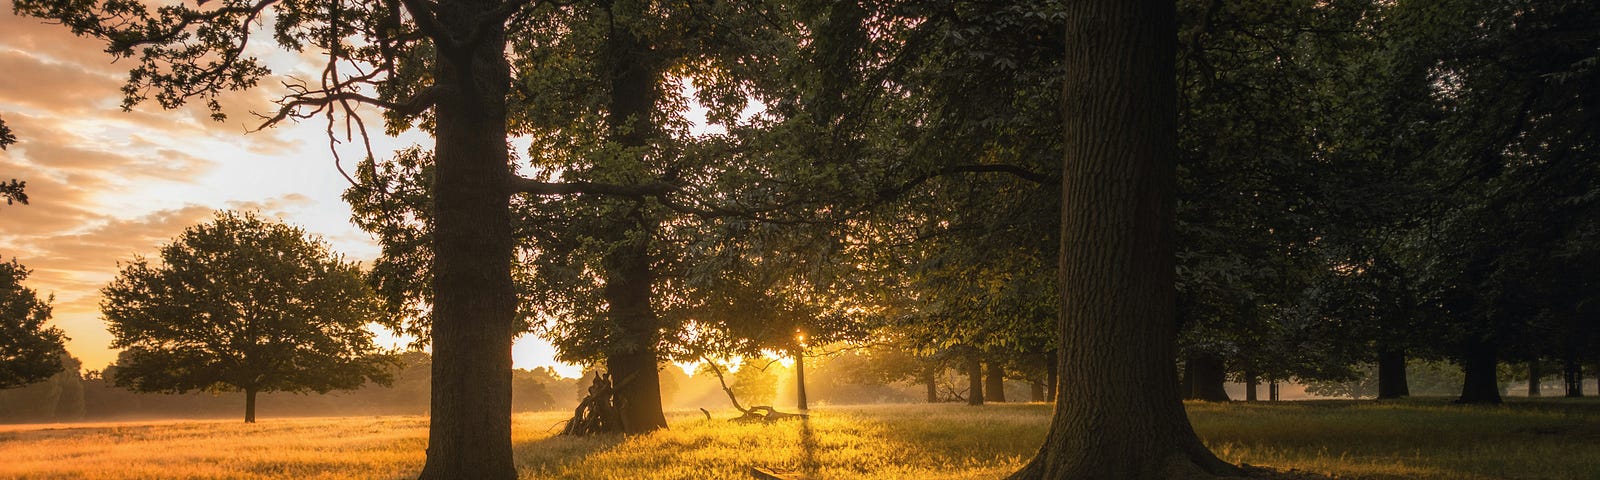 Sunrise through the trees in a field.